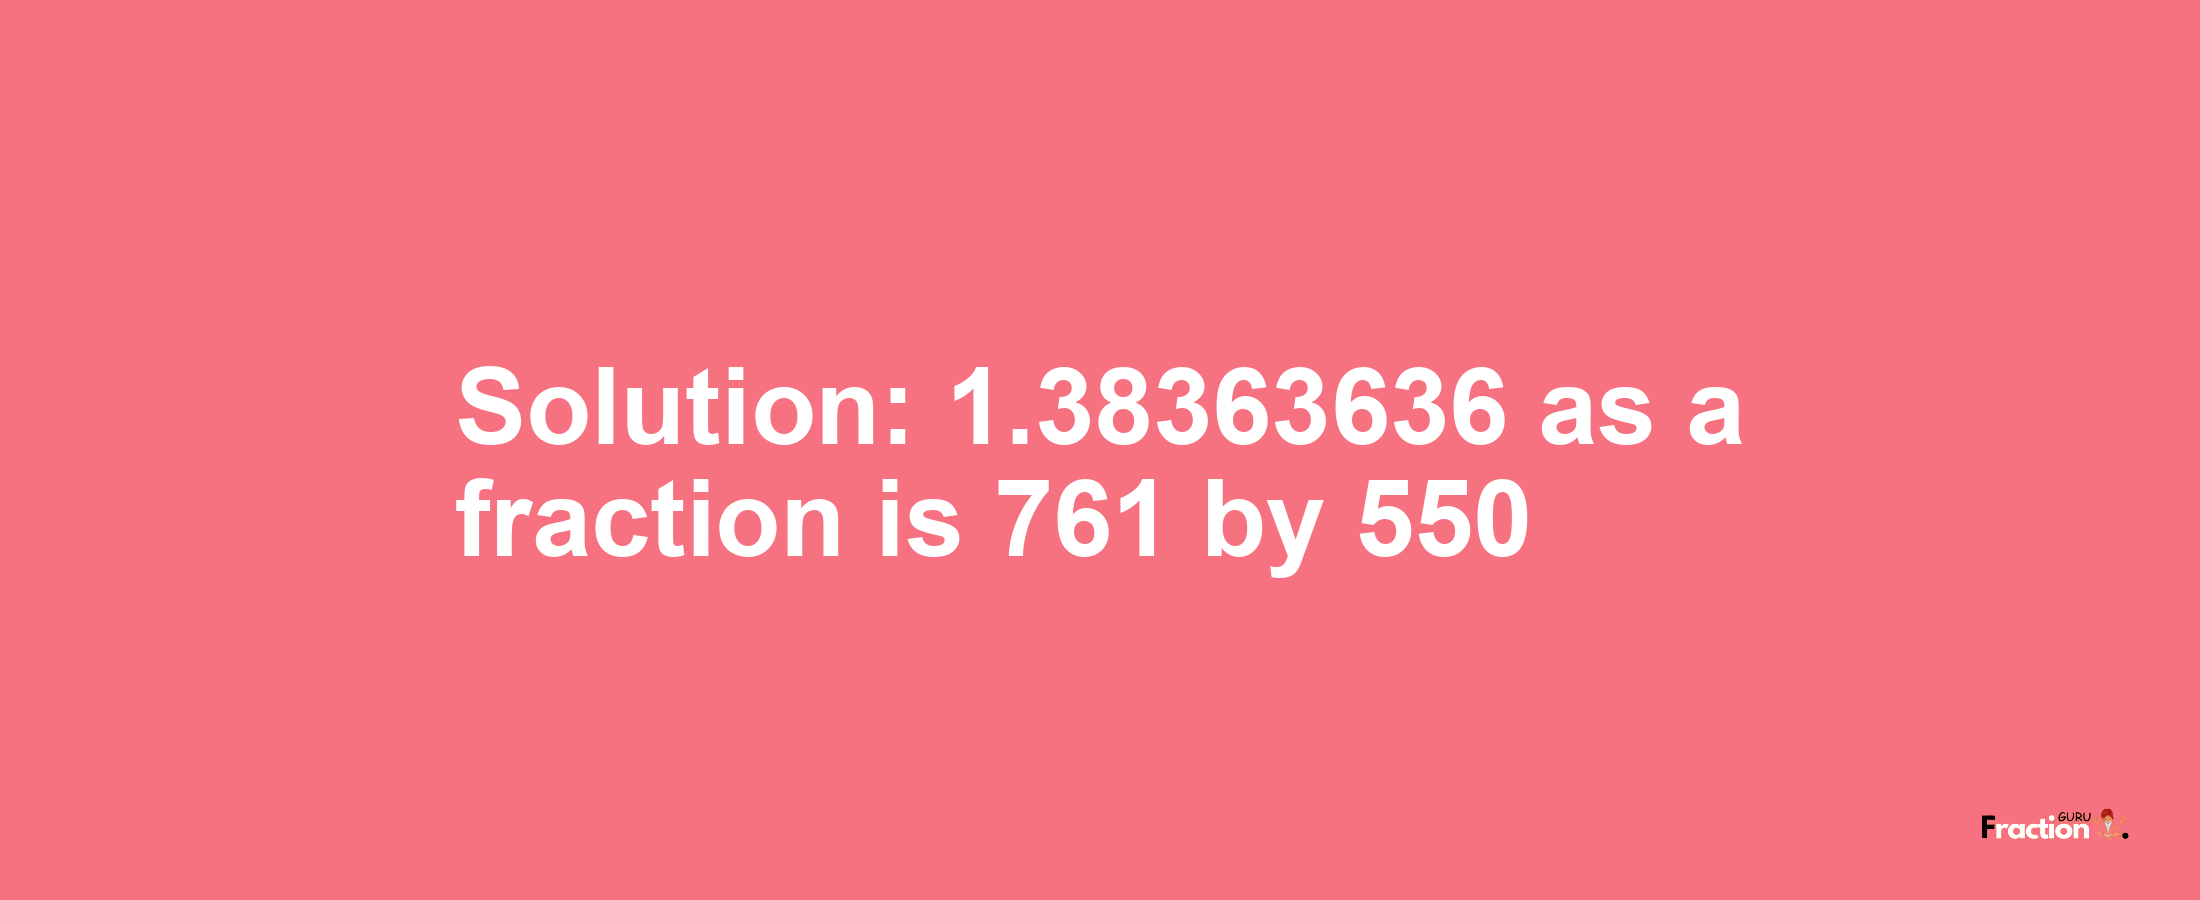 Solution:1.38363636 as a fraction is 761/550